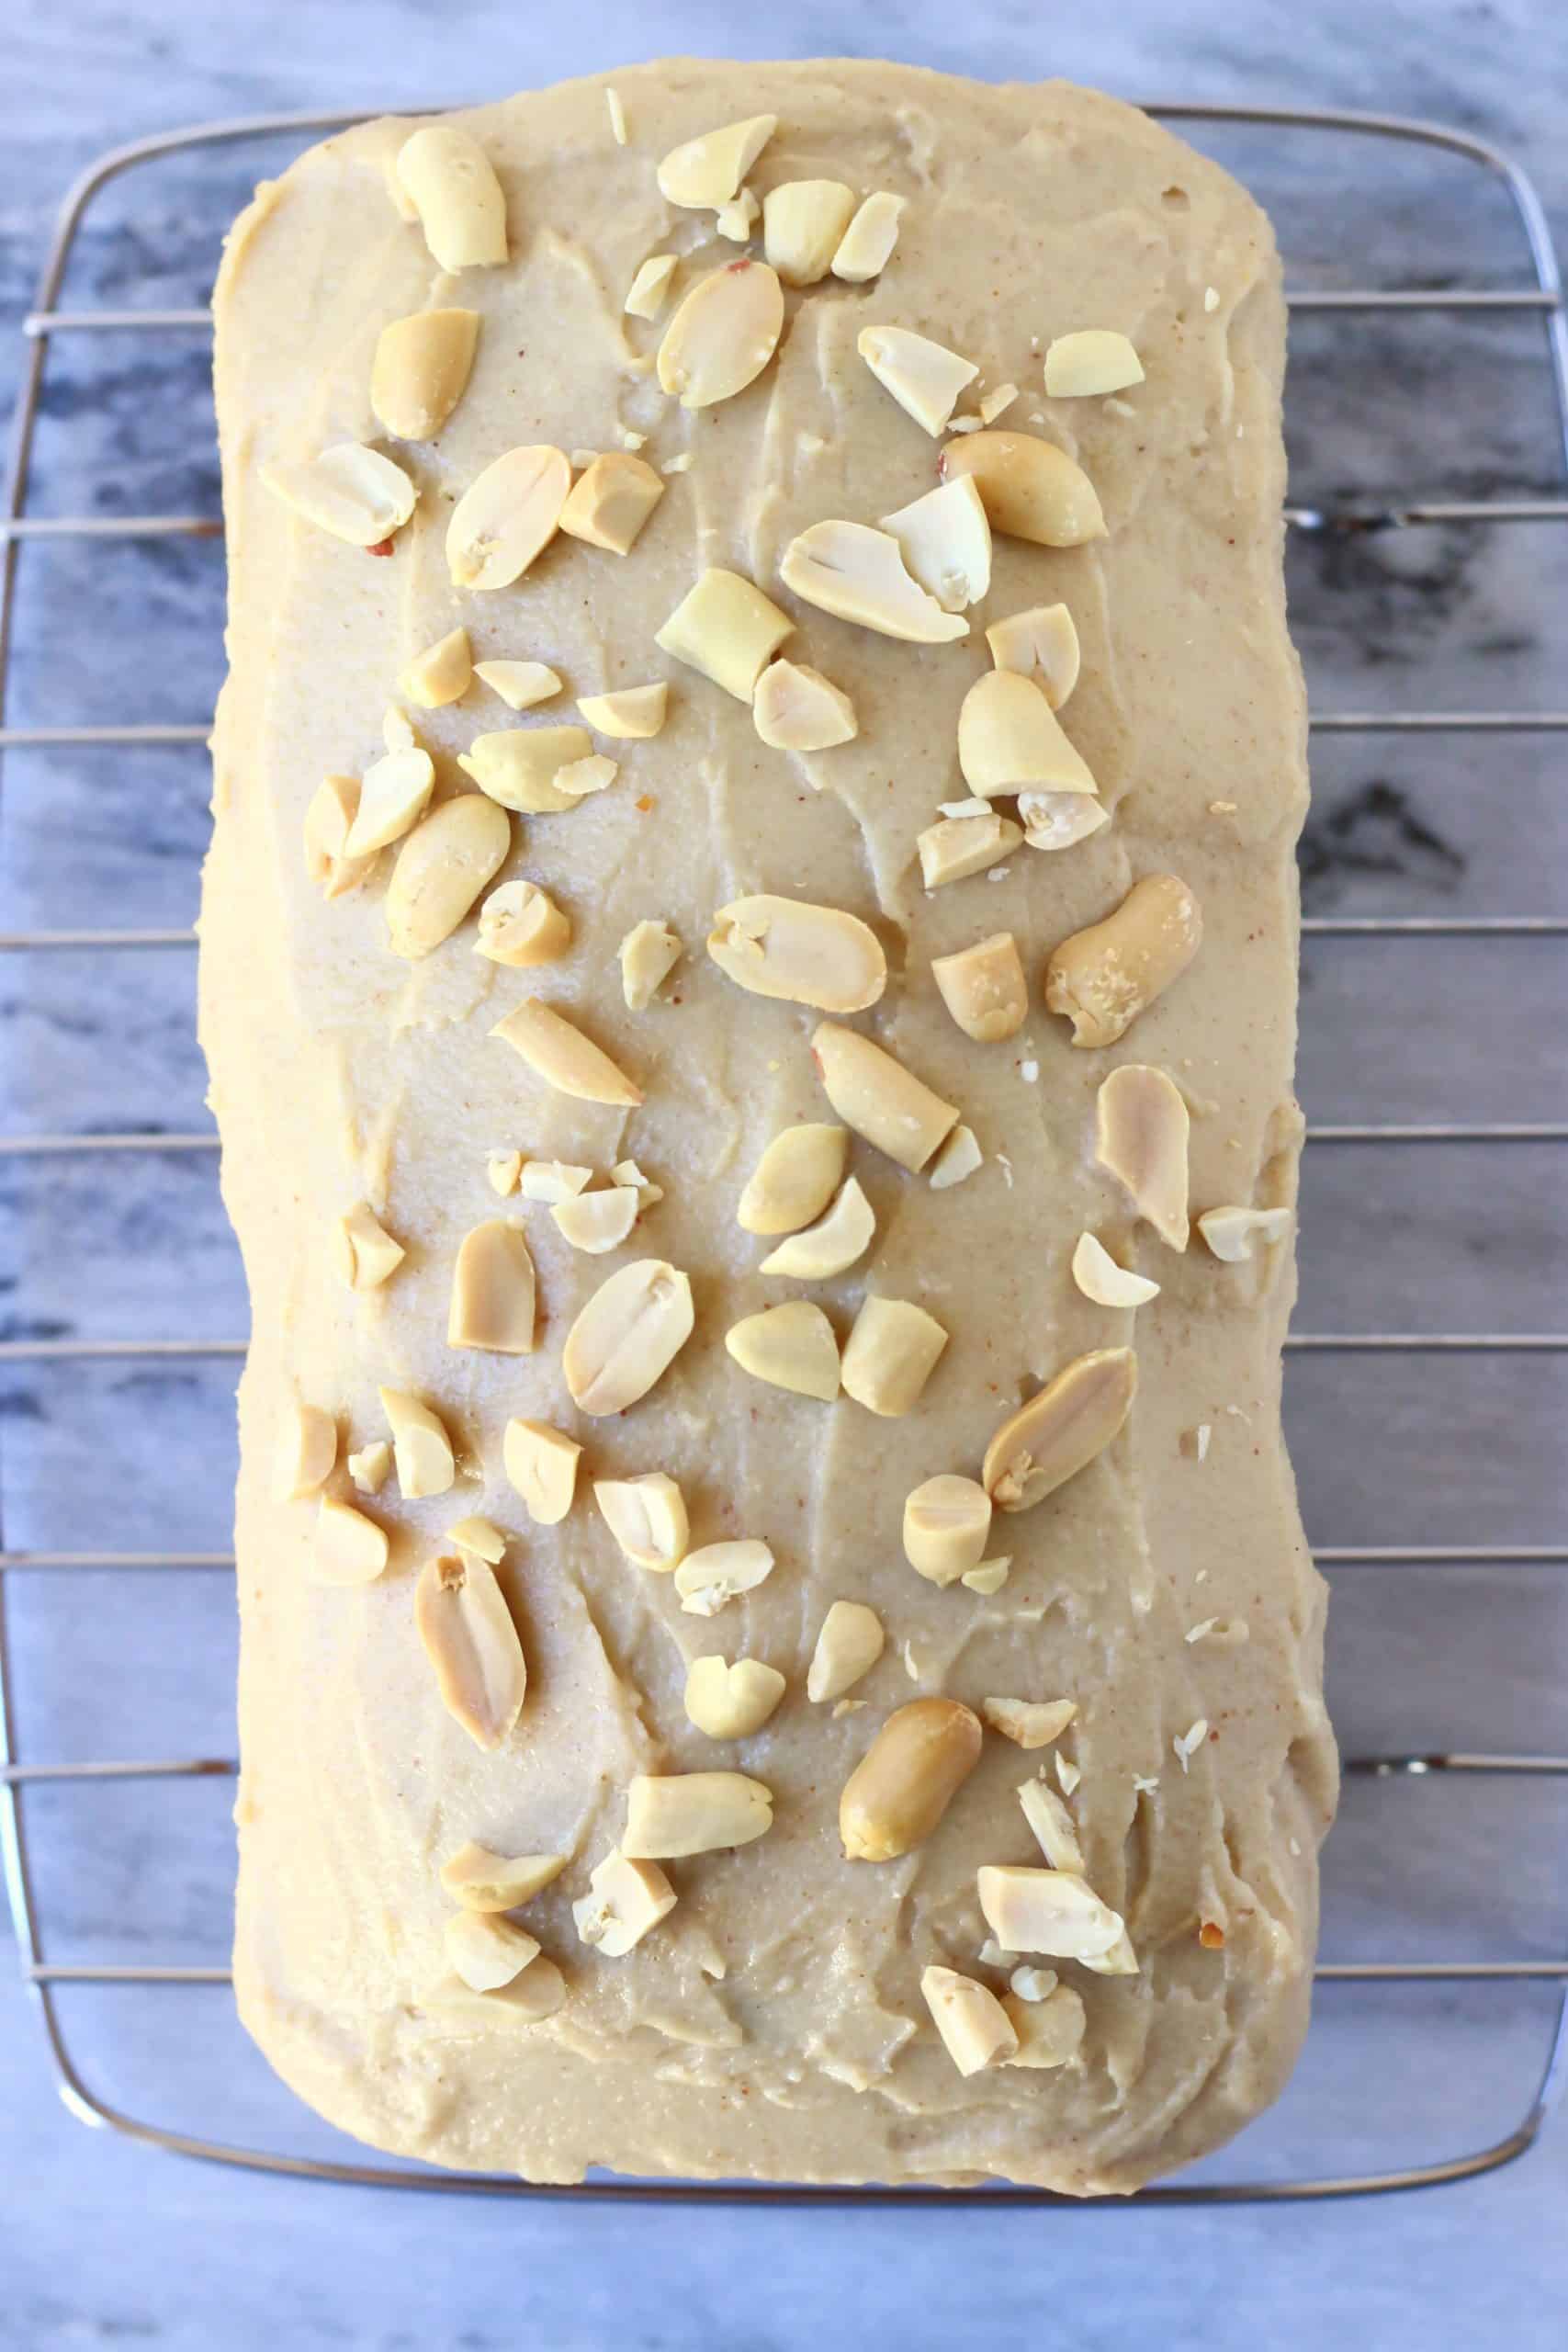 Peanut butter frosting spread over a loaf of banana bread with chopped peanuts on a wire rack